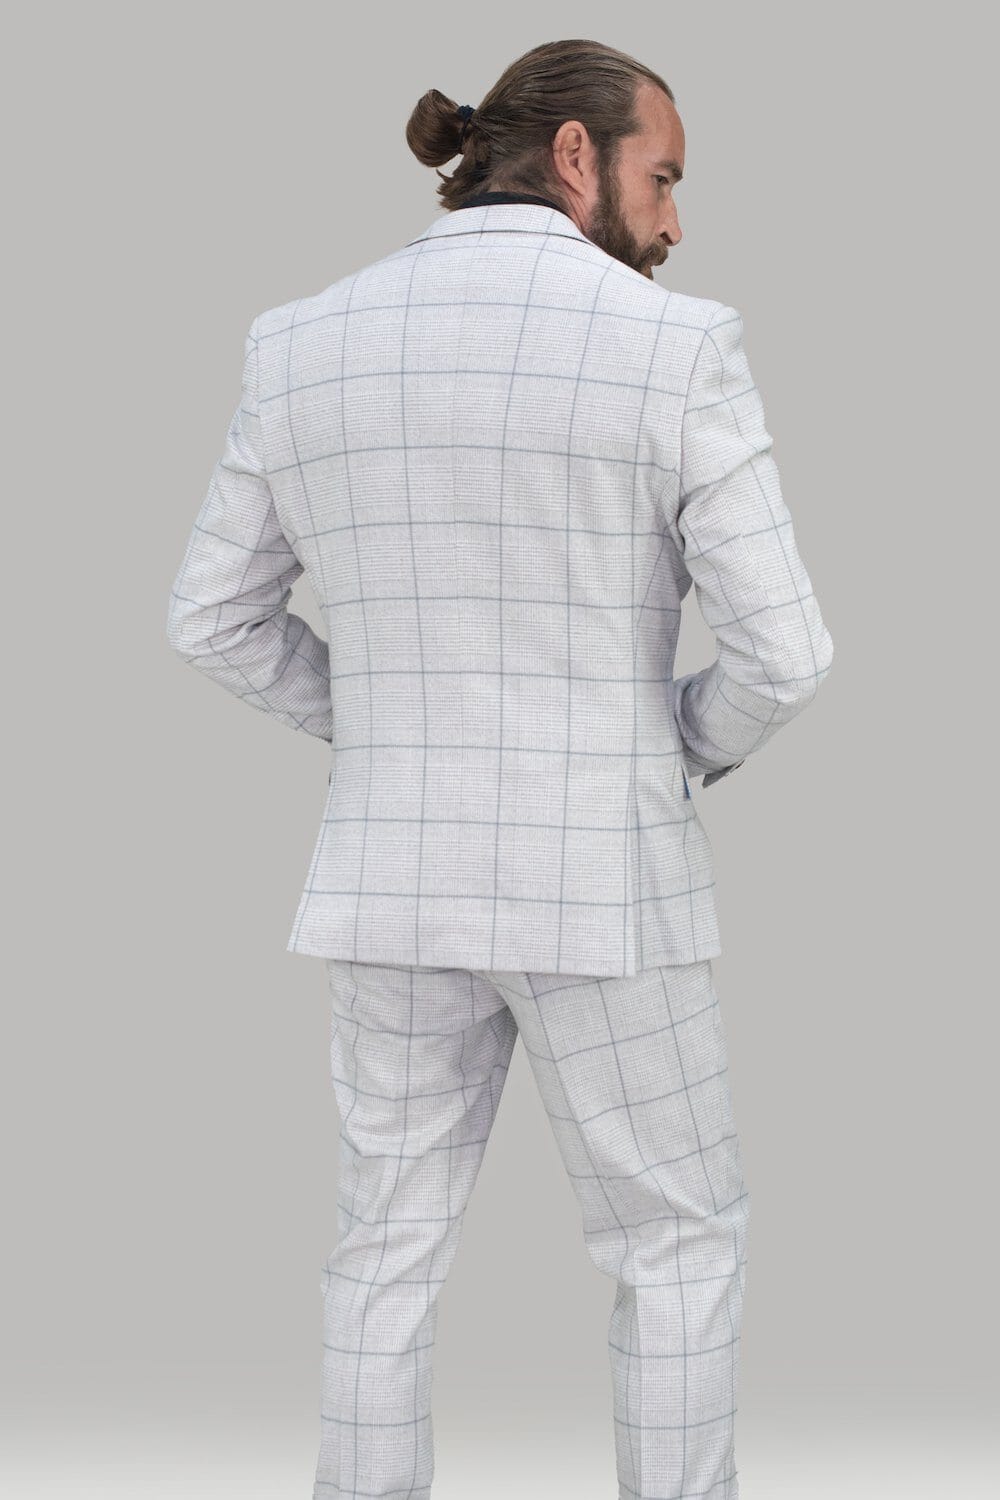 Radika Snow Check 3 Piece Suit - Suits - - THREADPEPPER